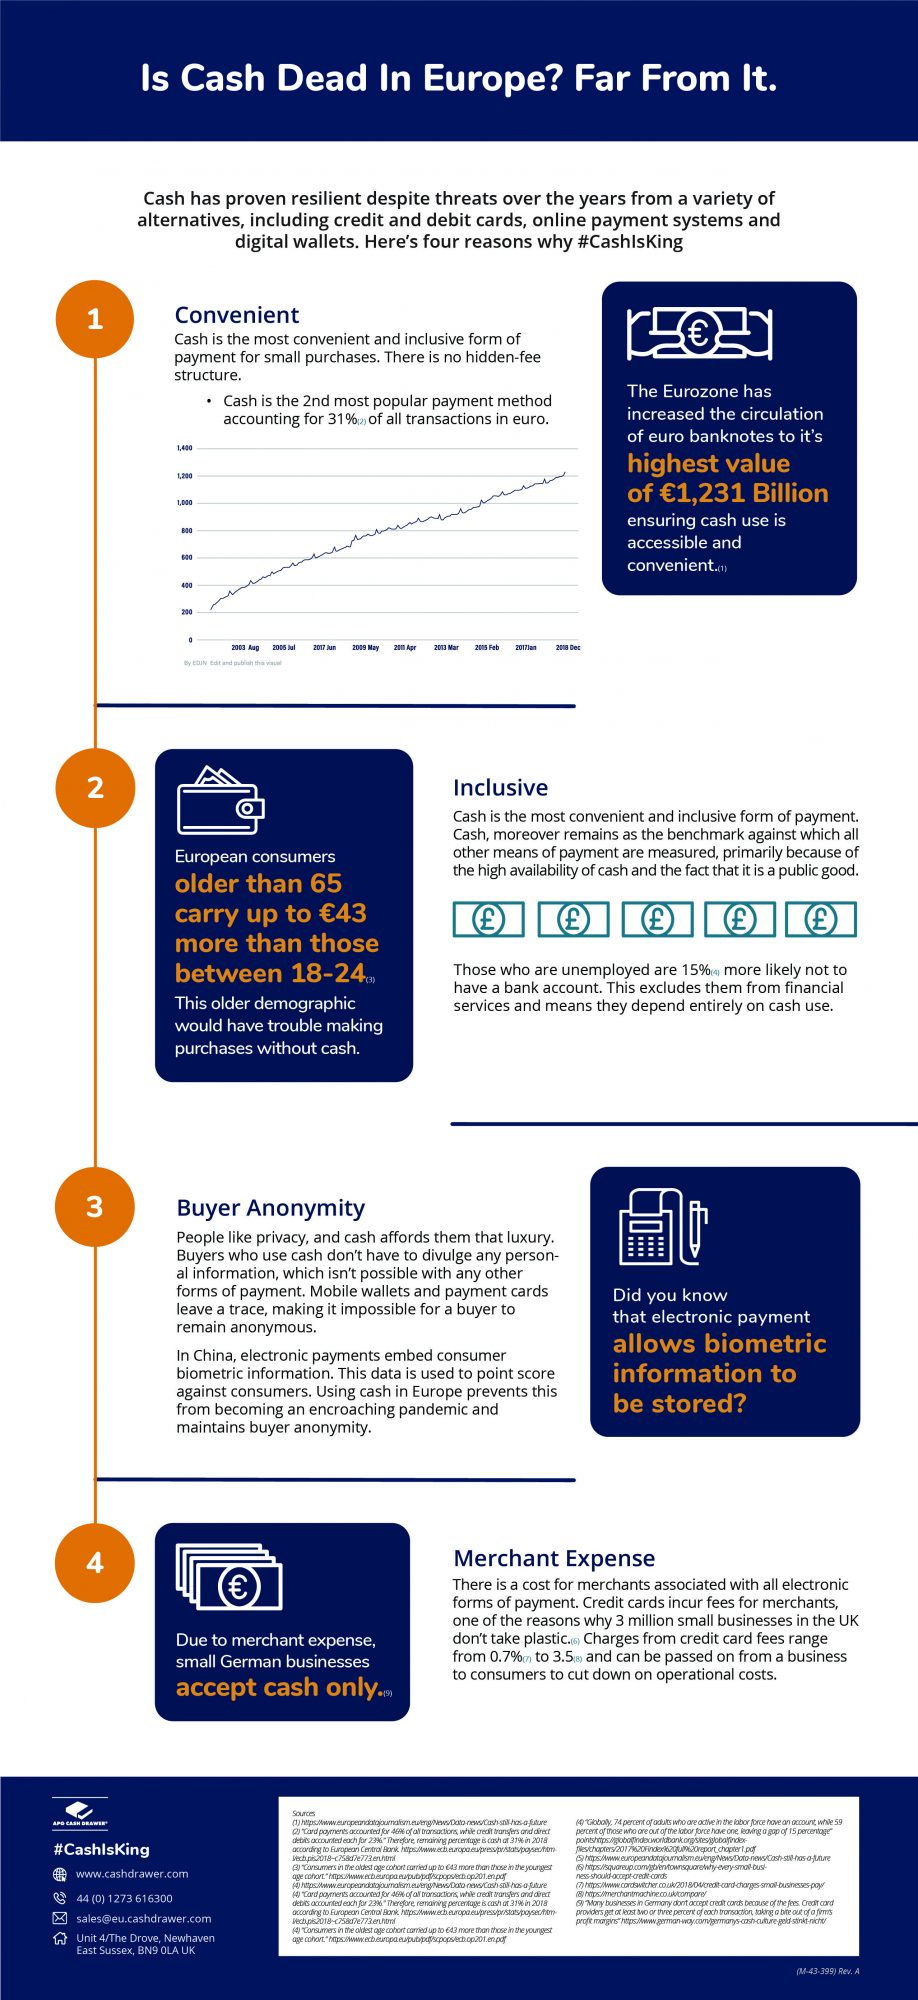 M-43-399 Rev. A (4 Reasons Why Cash is King - Infographic for EMEA)-01